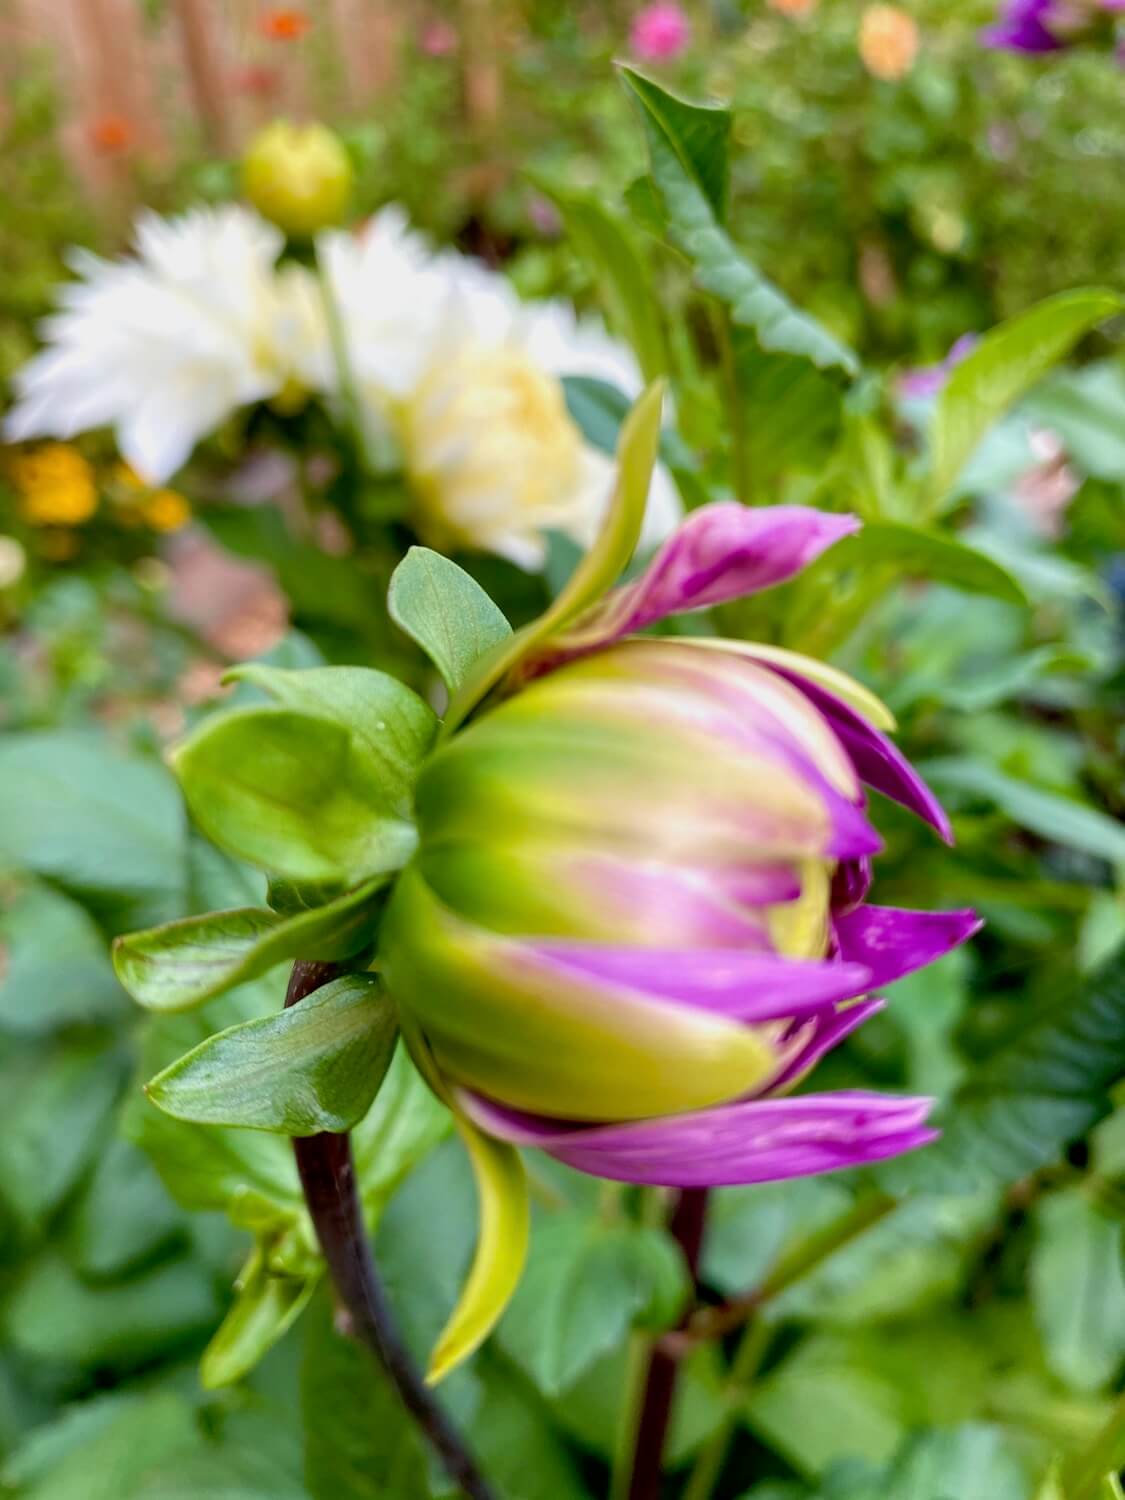 A fresh dahlia bloom still tight in the bud gets ready to burst open on the scene of this P-Patch garden. The bloom shows various hues of purple and light green while a fully bloomed bunch of white flowers is out of focus several feet away in the garden.